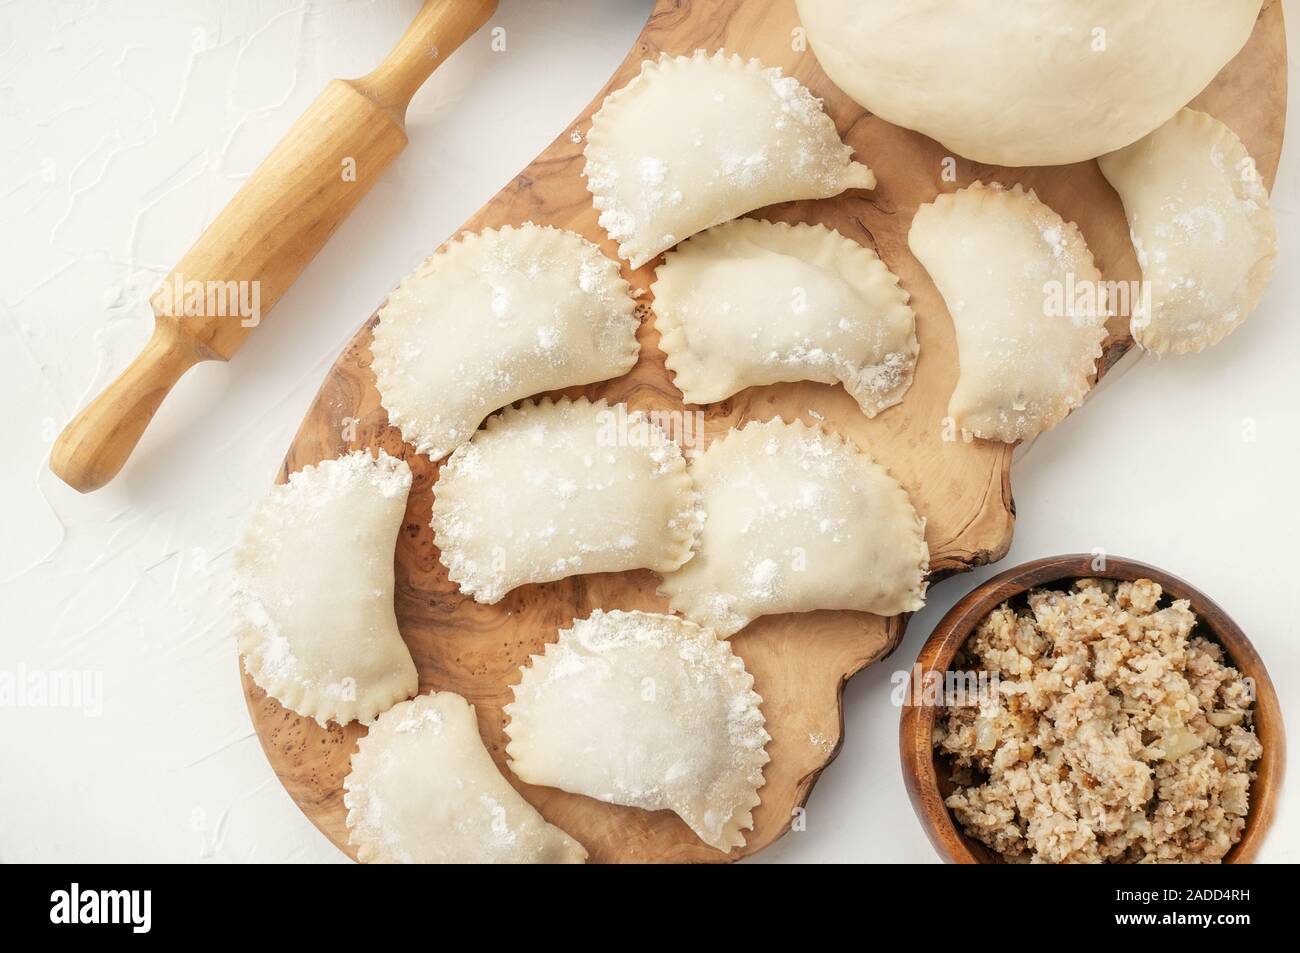 Cooking homemade dumplings with meat from raw homemade dough. National cuisine of Slavic peoples. Stock Photo